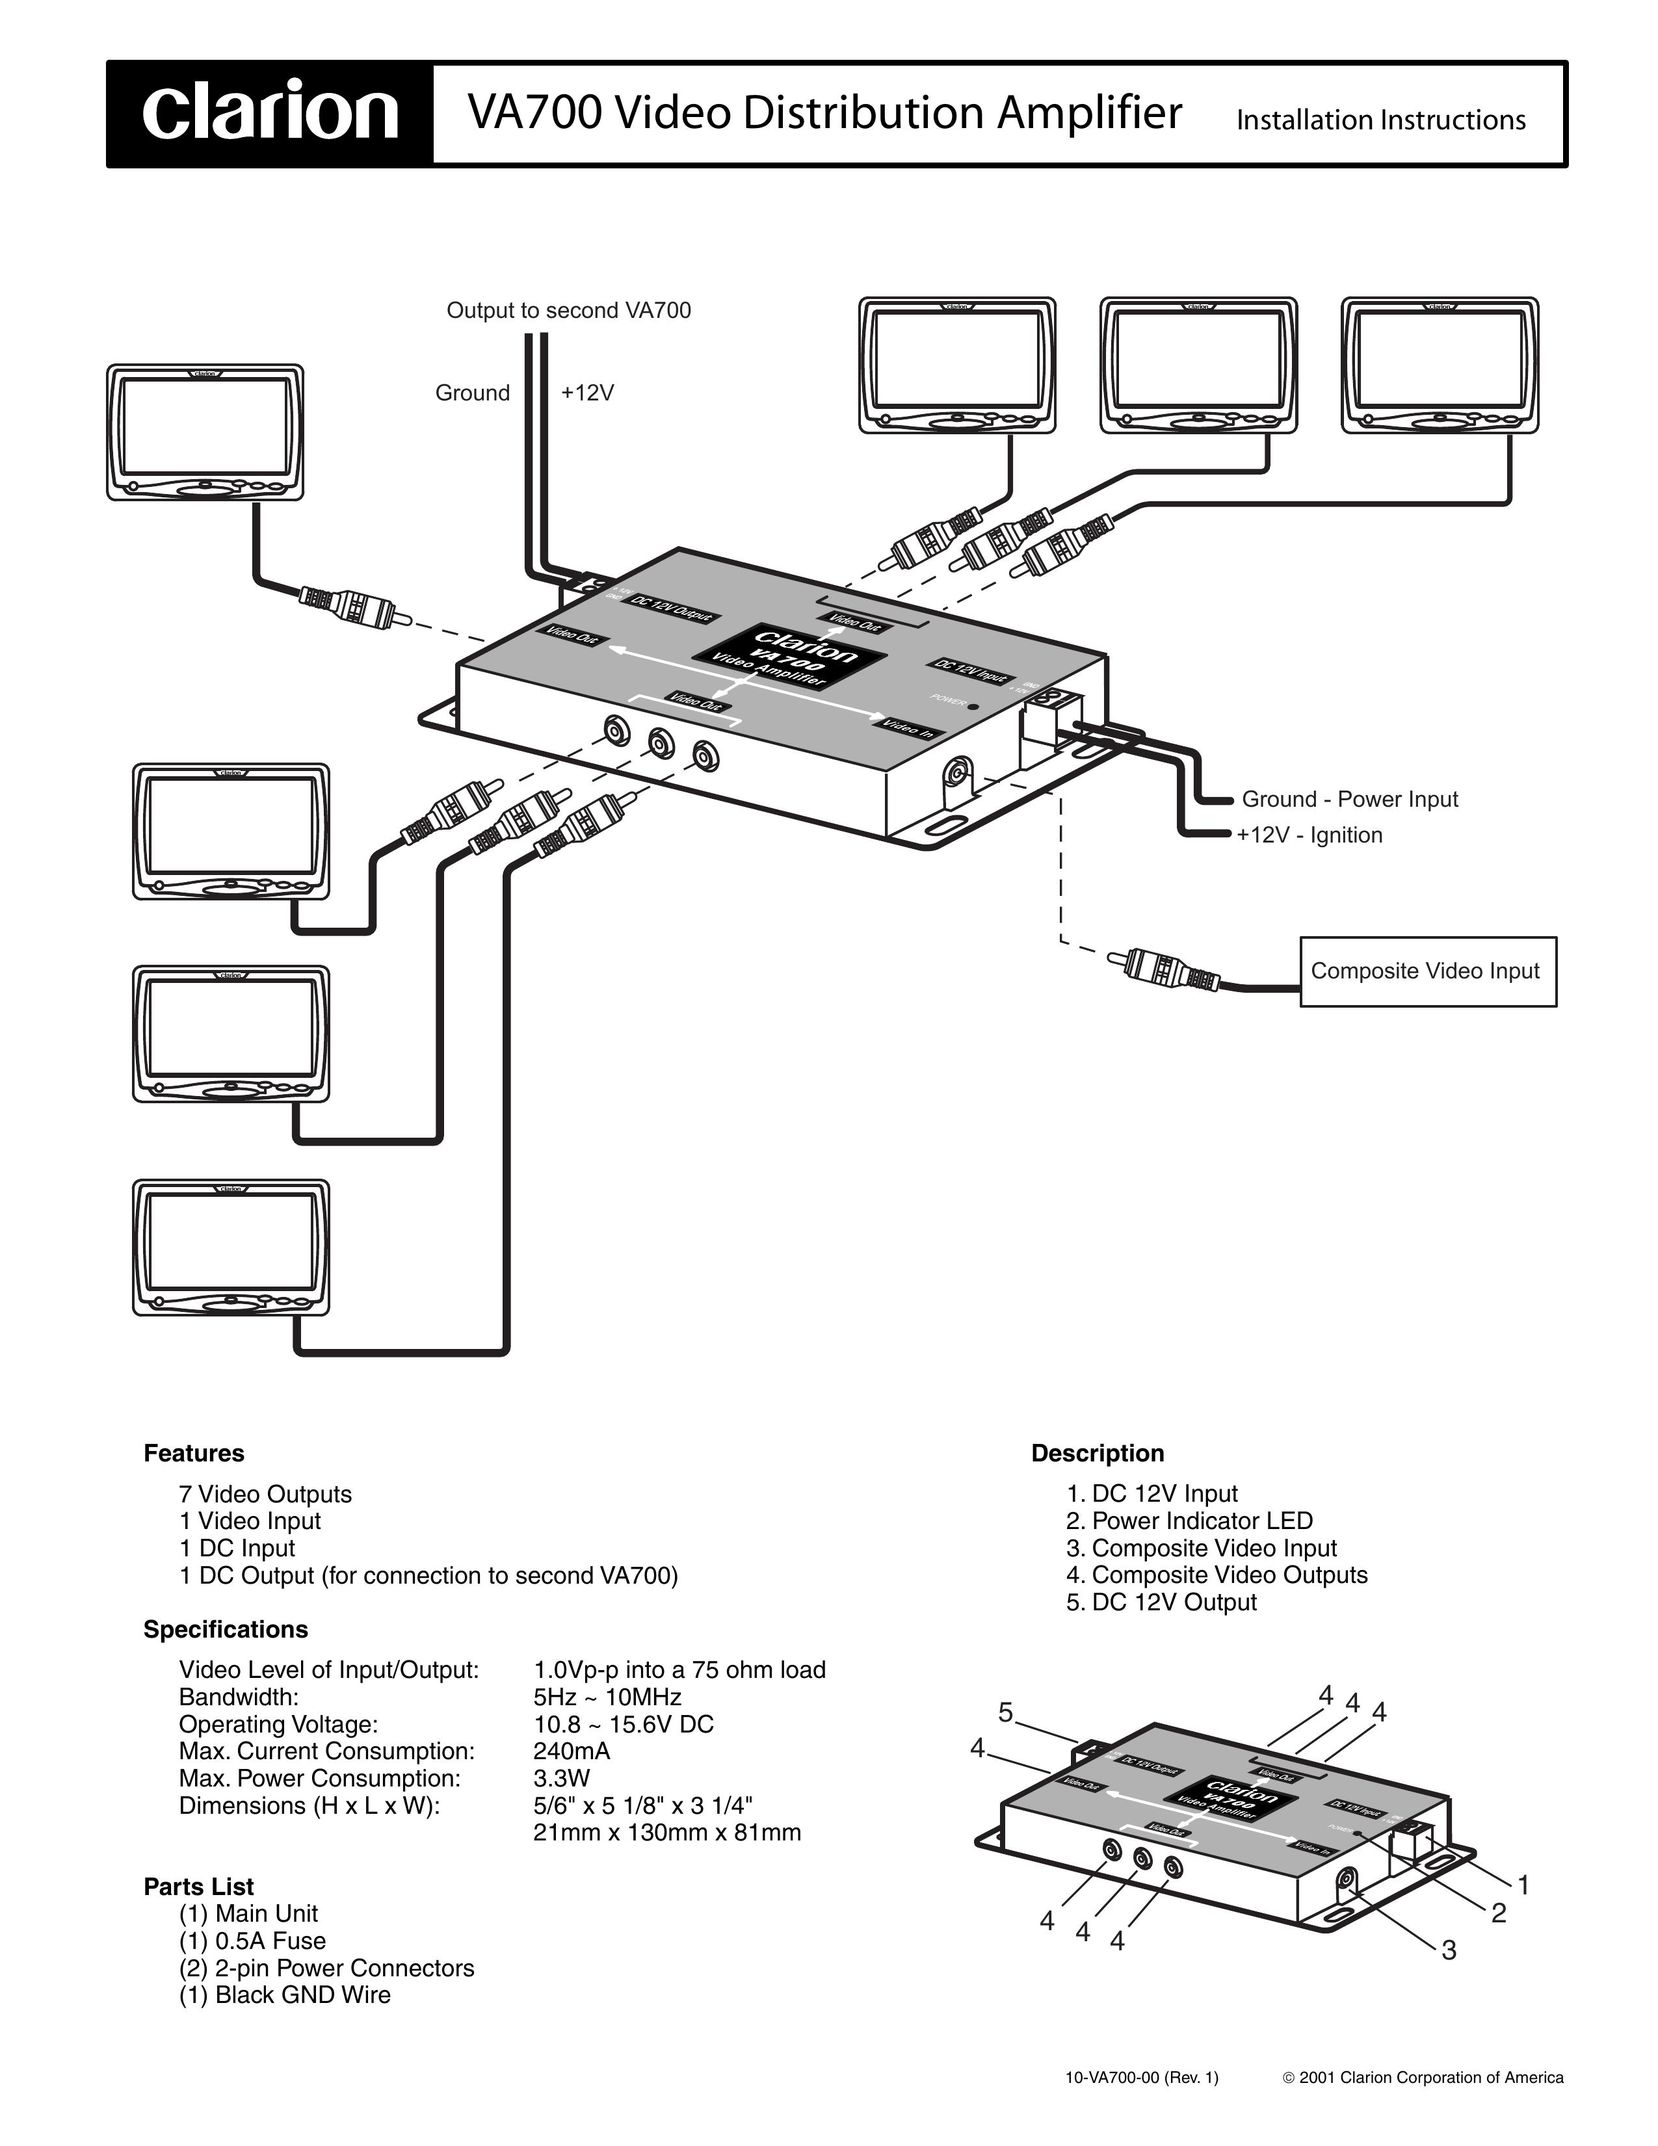 Clarion VA700 Home Theater System User Manual